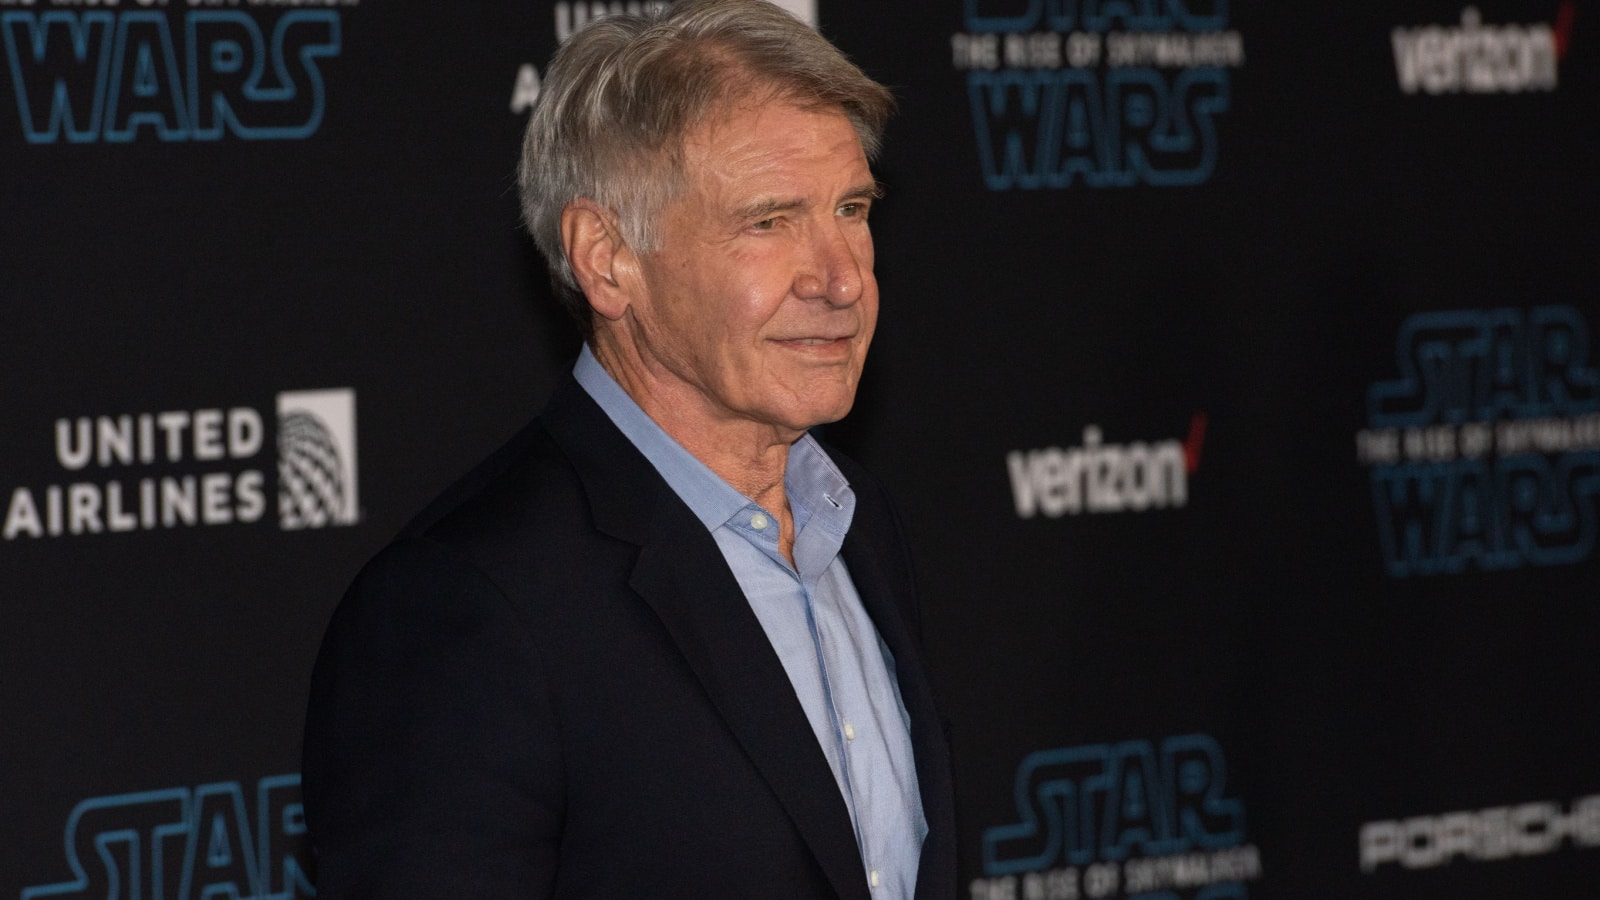 HOLLYWOOD, CALIFORNIA / USA - DECEMBER 16, 2019: Actor Harrison Ford attends the premiere of Disney's "Star Wars: The Rise of Skywalker" on December 16, 2019 in Hollywood, California.